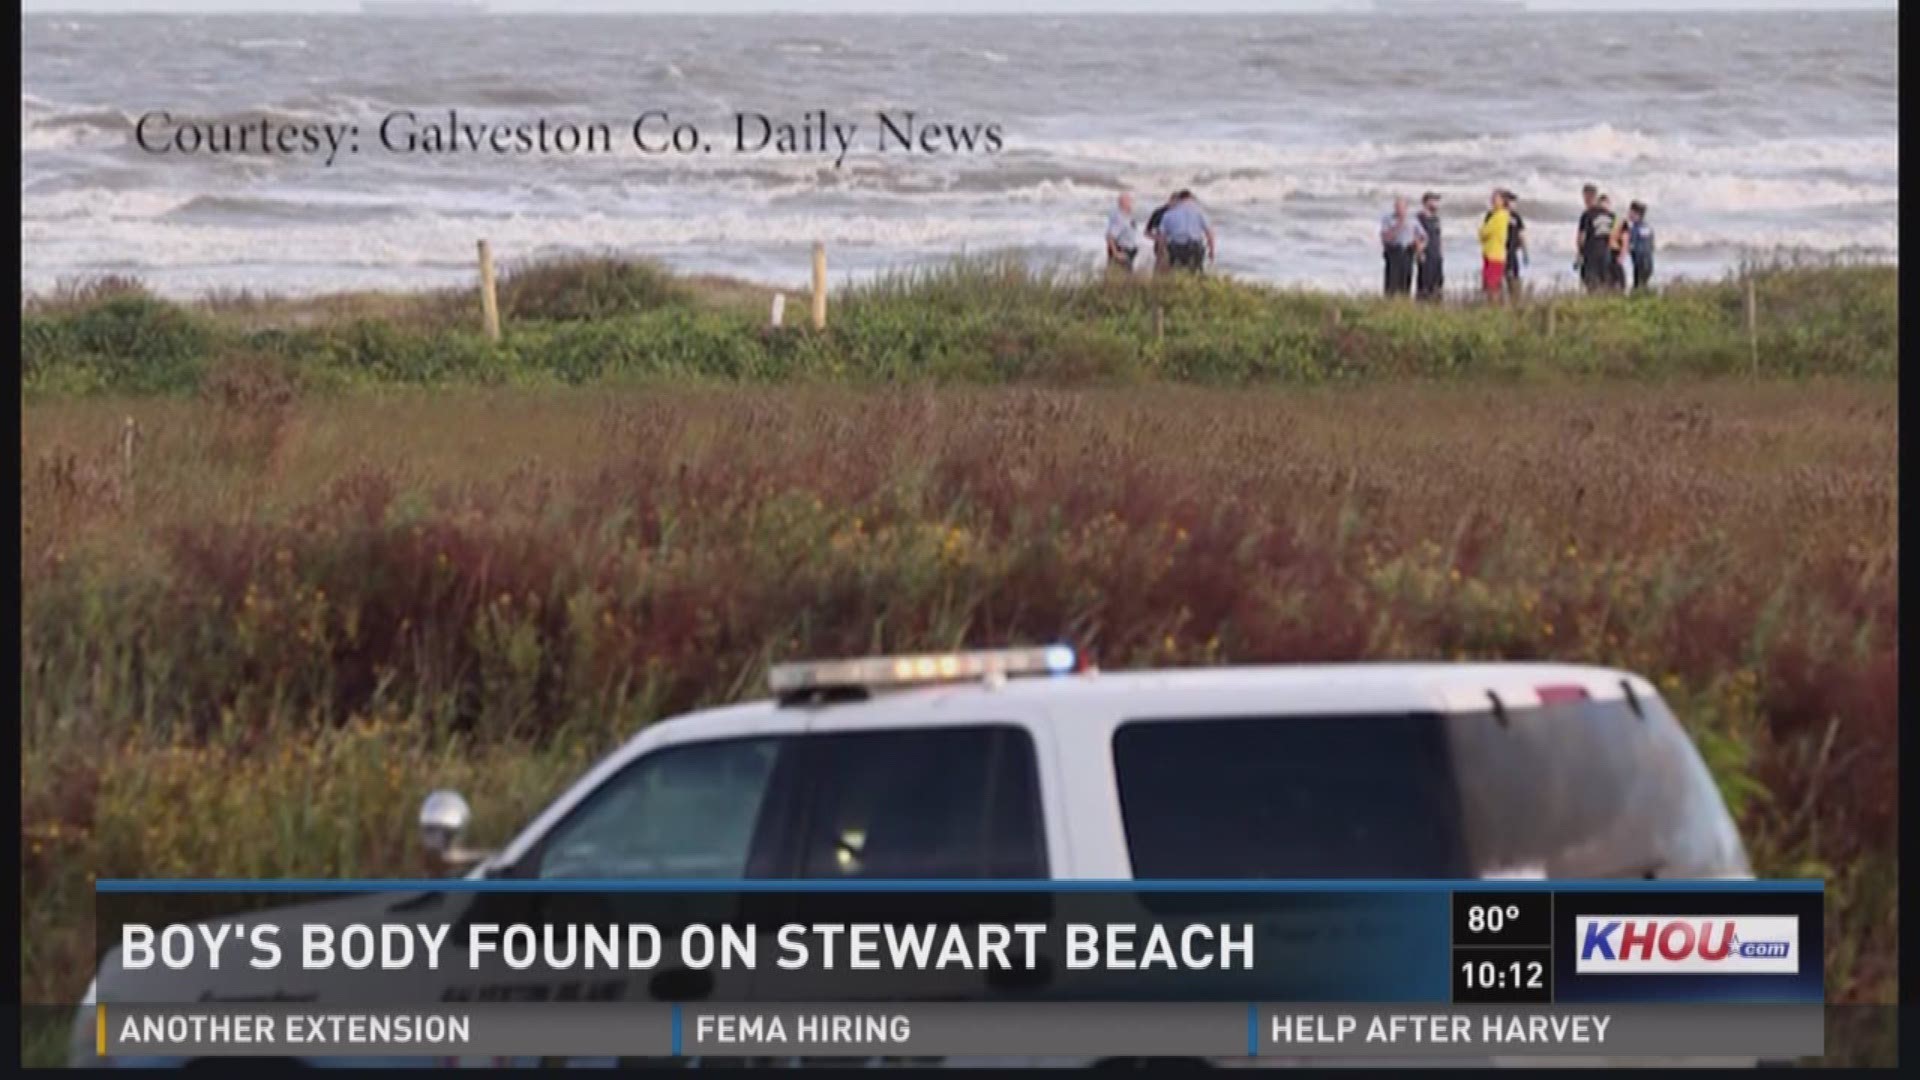 A small vigil was held for a young child after his body was found in the surf on a beach in Galveston Friday evening. 